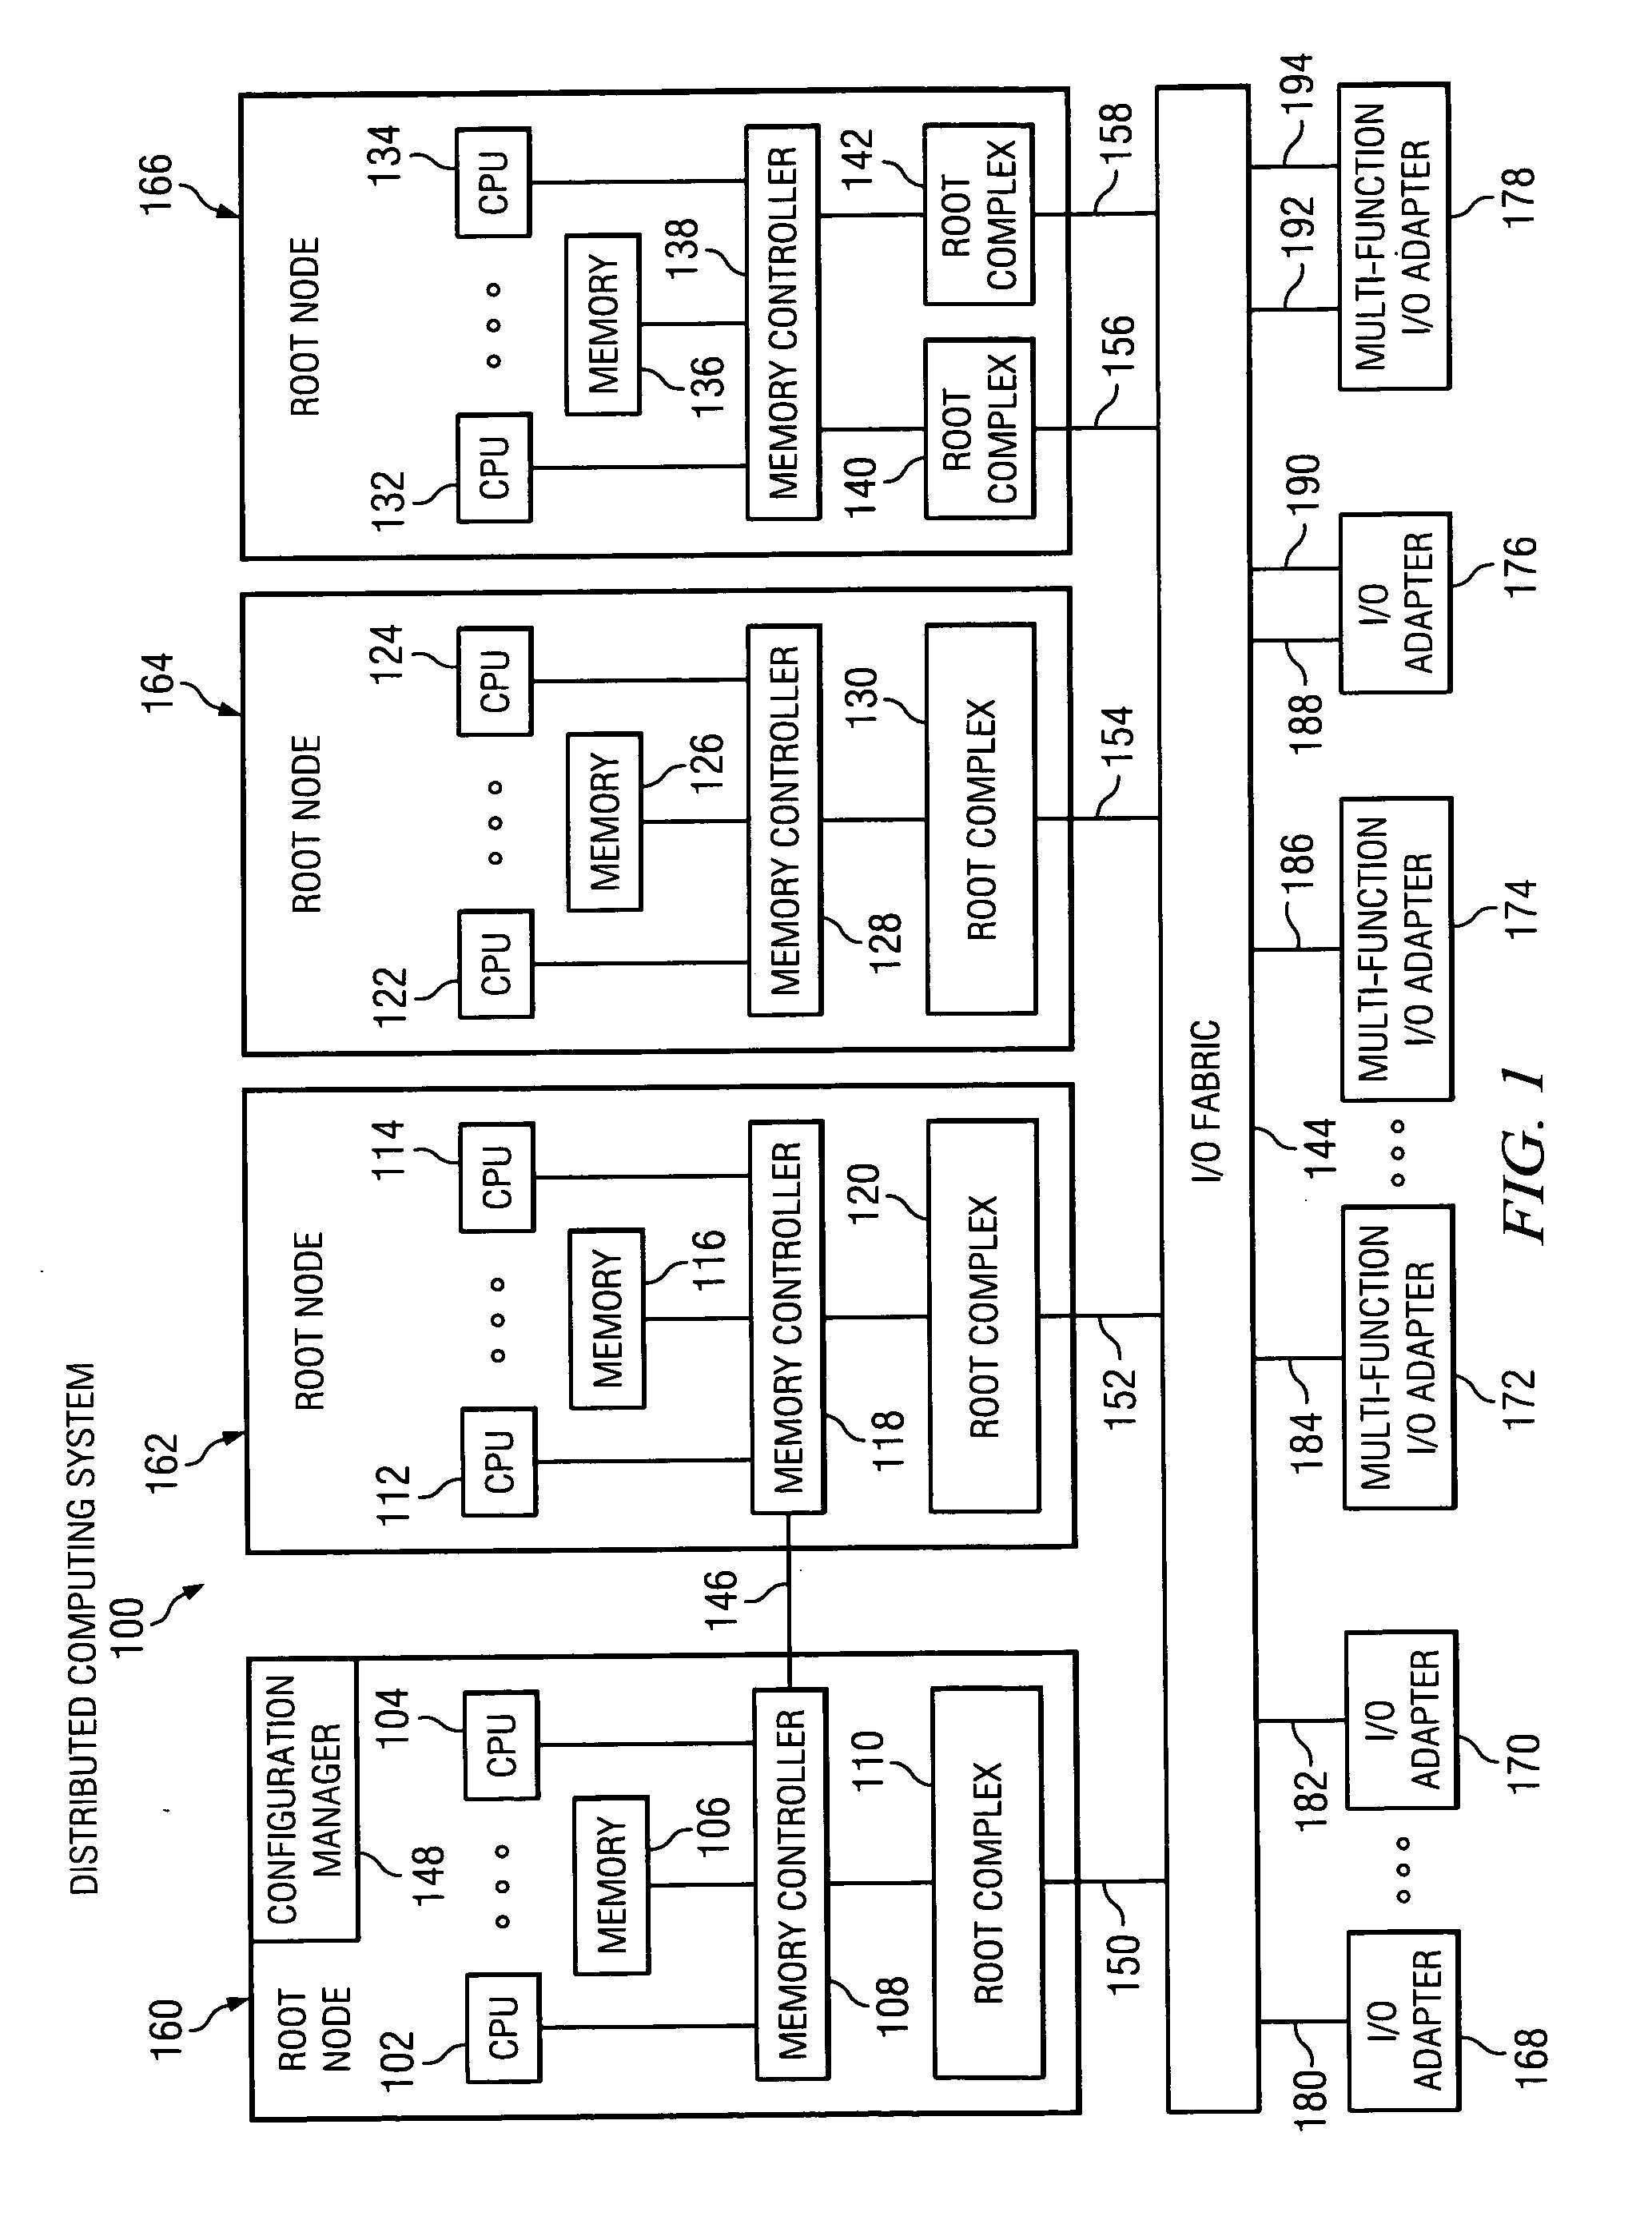 Method for confirming identity of a master node selected to control I/O fabric configuration in a multi-host environment